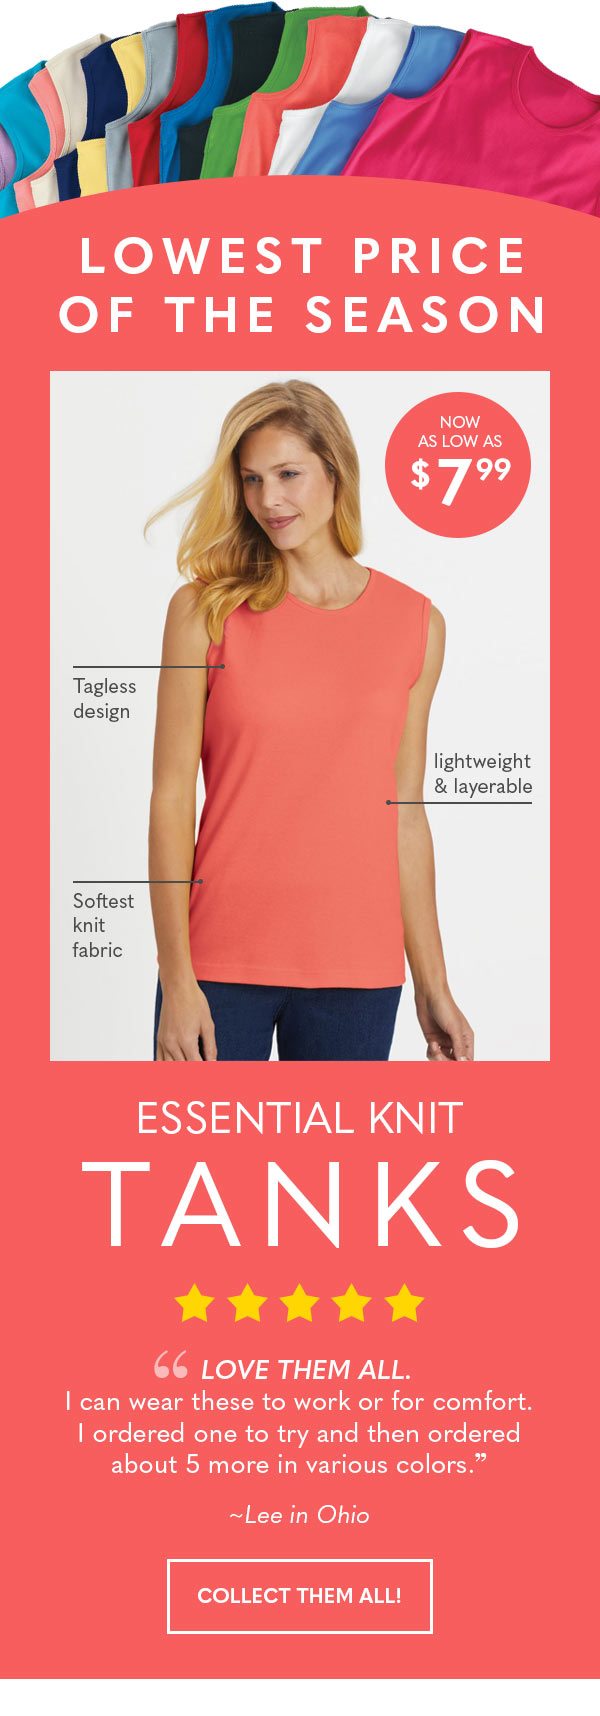 LOWEST PRICE OF THE SEASON! Women's Essential Knit Tank now as low as $7.99